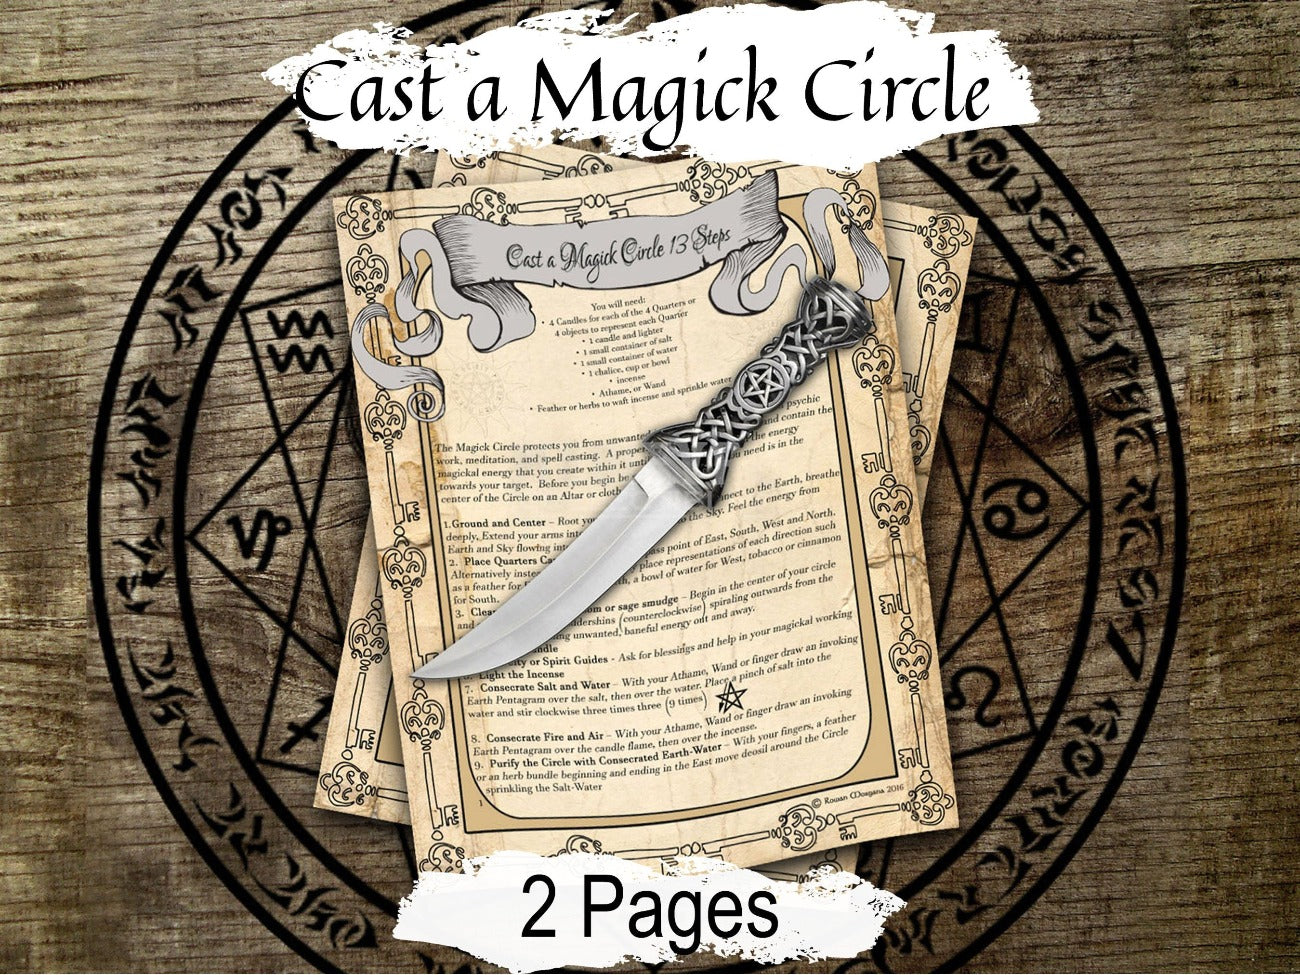 CAST a MAGICK CIRCLE, Sacred Space, Rituals Spells & Ceremonies, Call the Quarters, Witchcraft Divine Connection, Spirit Realm, 2 Pages - Morgana Magick Spell